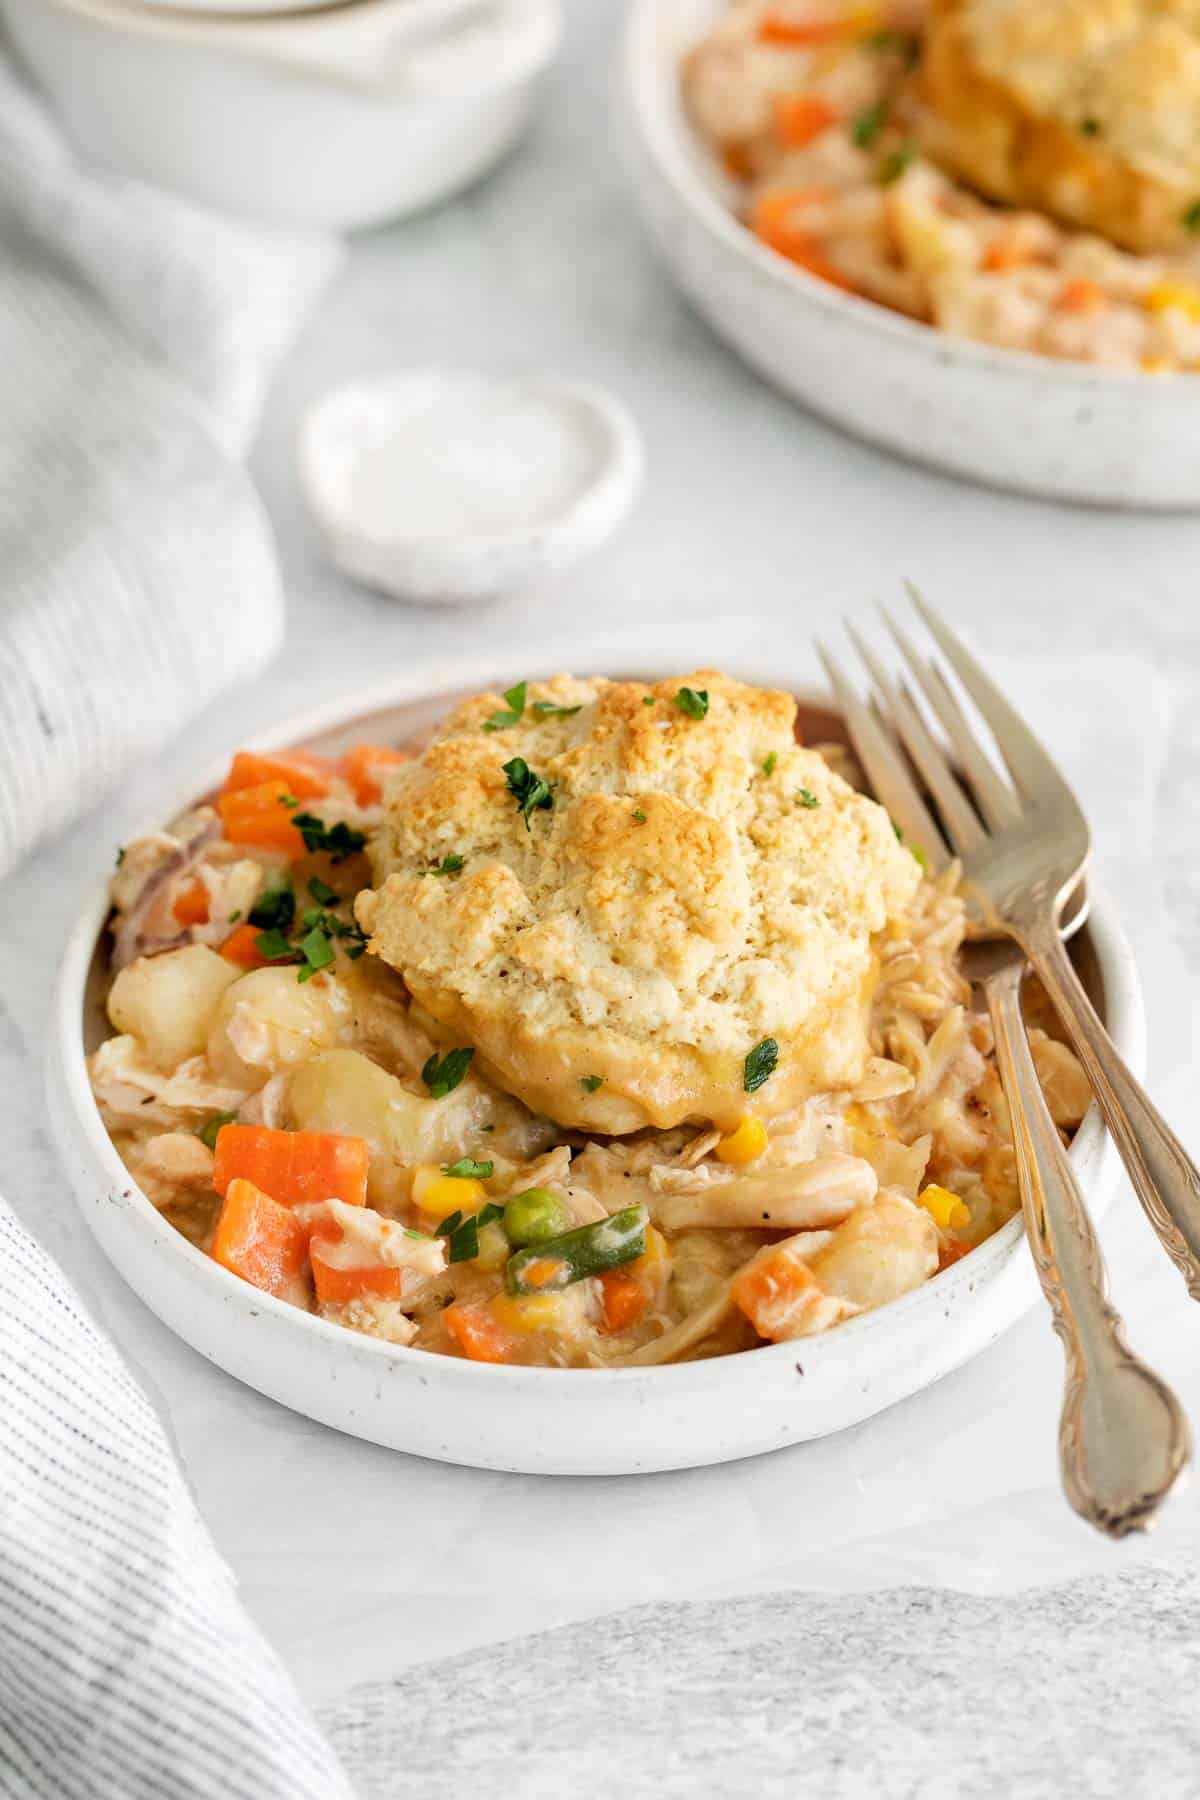 Chicken pot pie dished into a bowl with a fork next to it